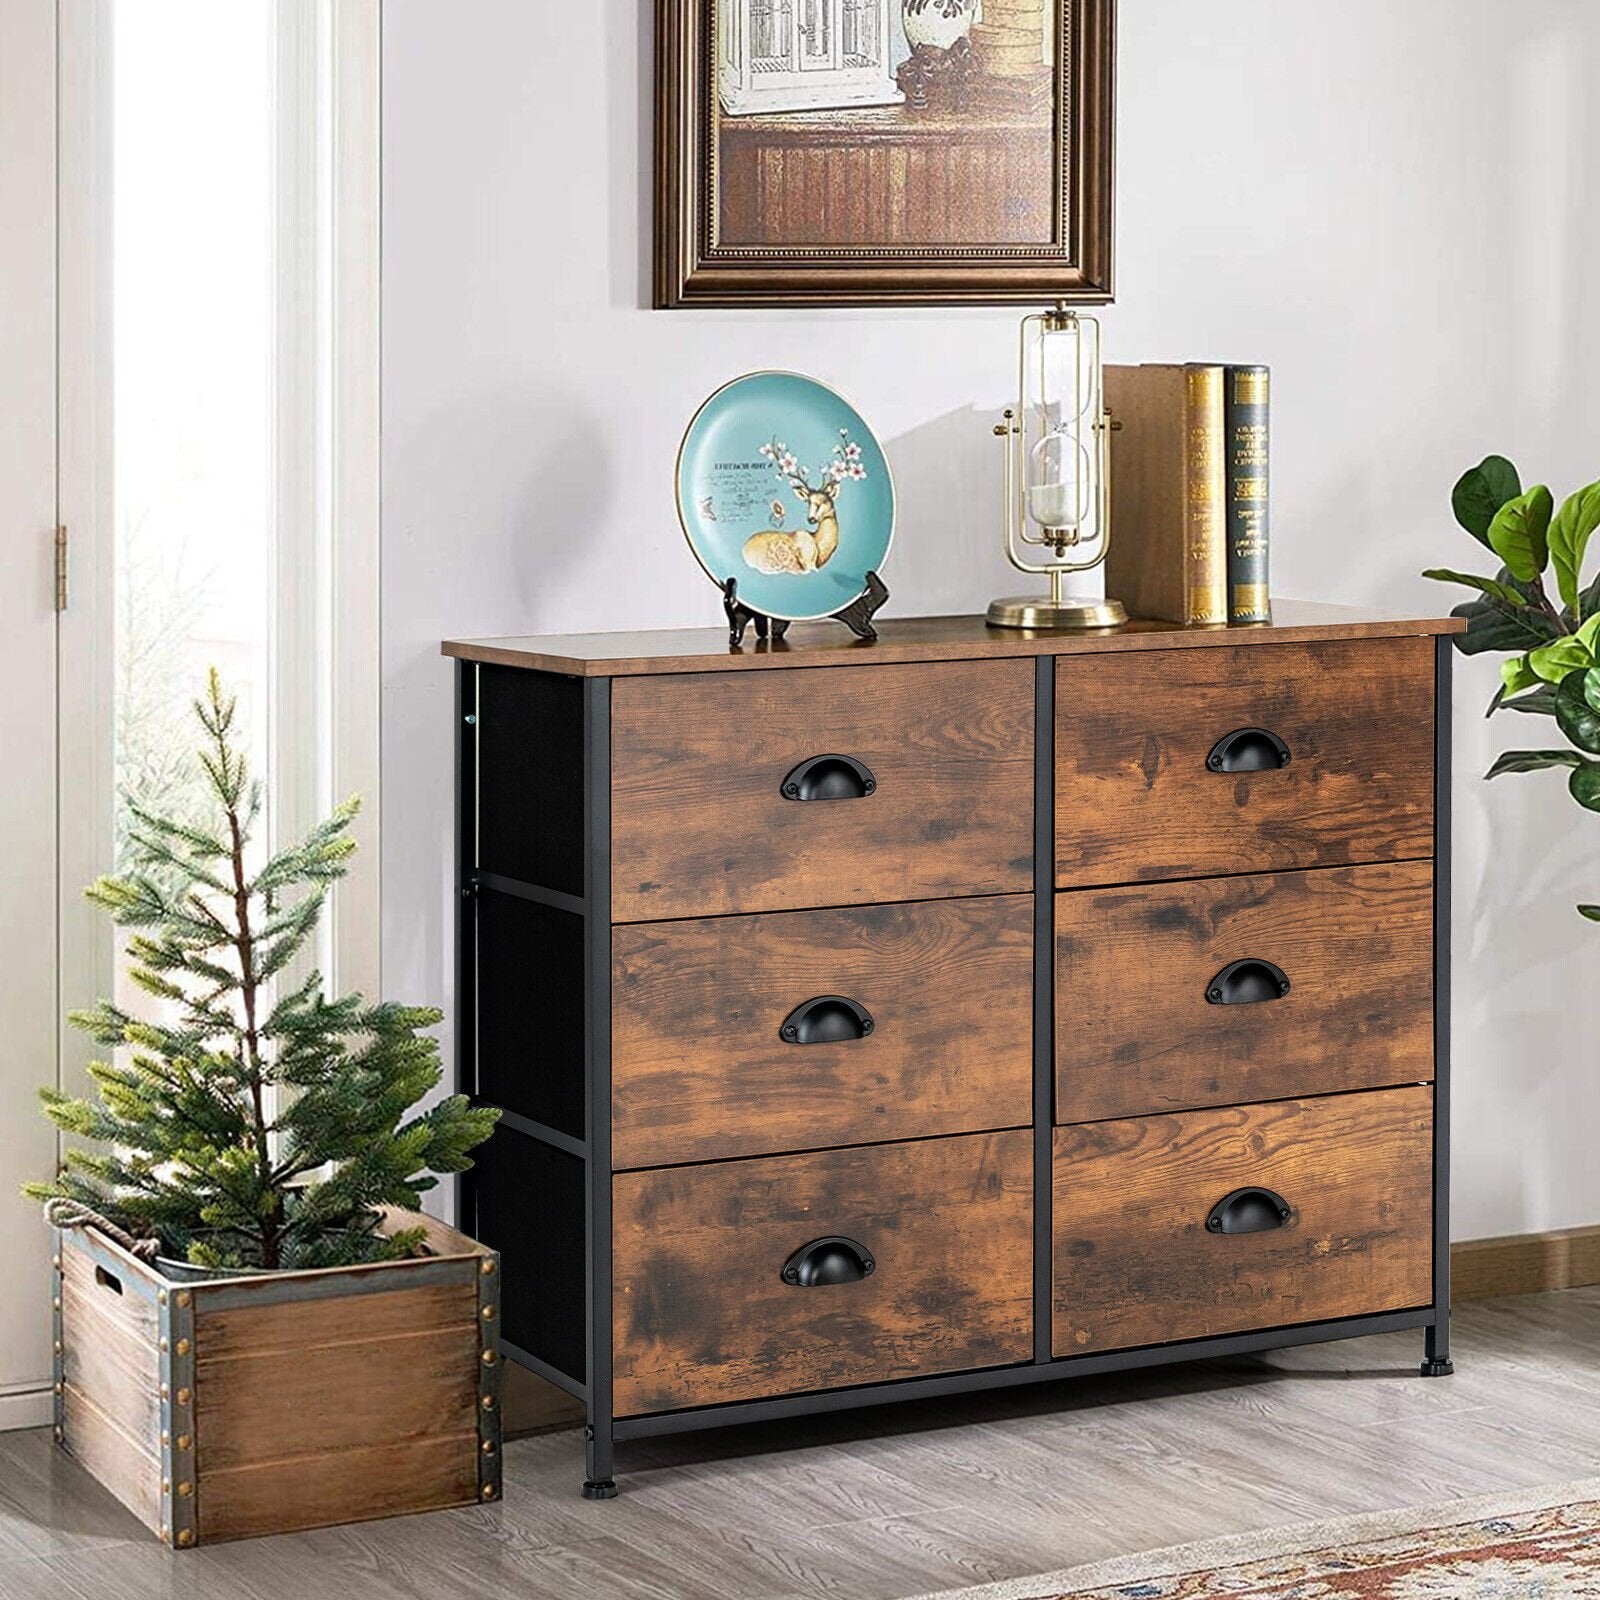 6 Fabric Drawer Storage Chest with Wooden Top, Rustic Brown - Gallery Canada